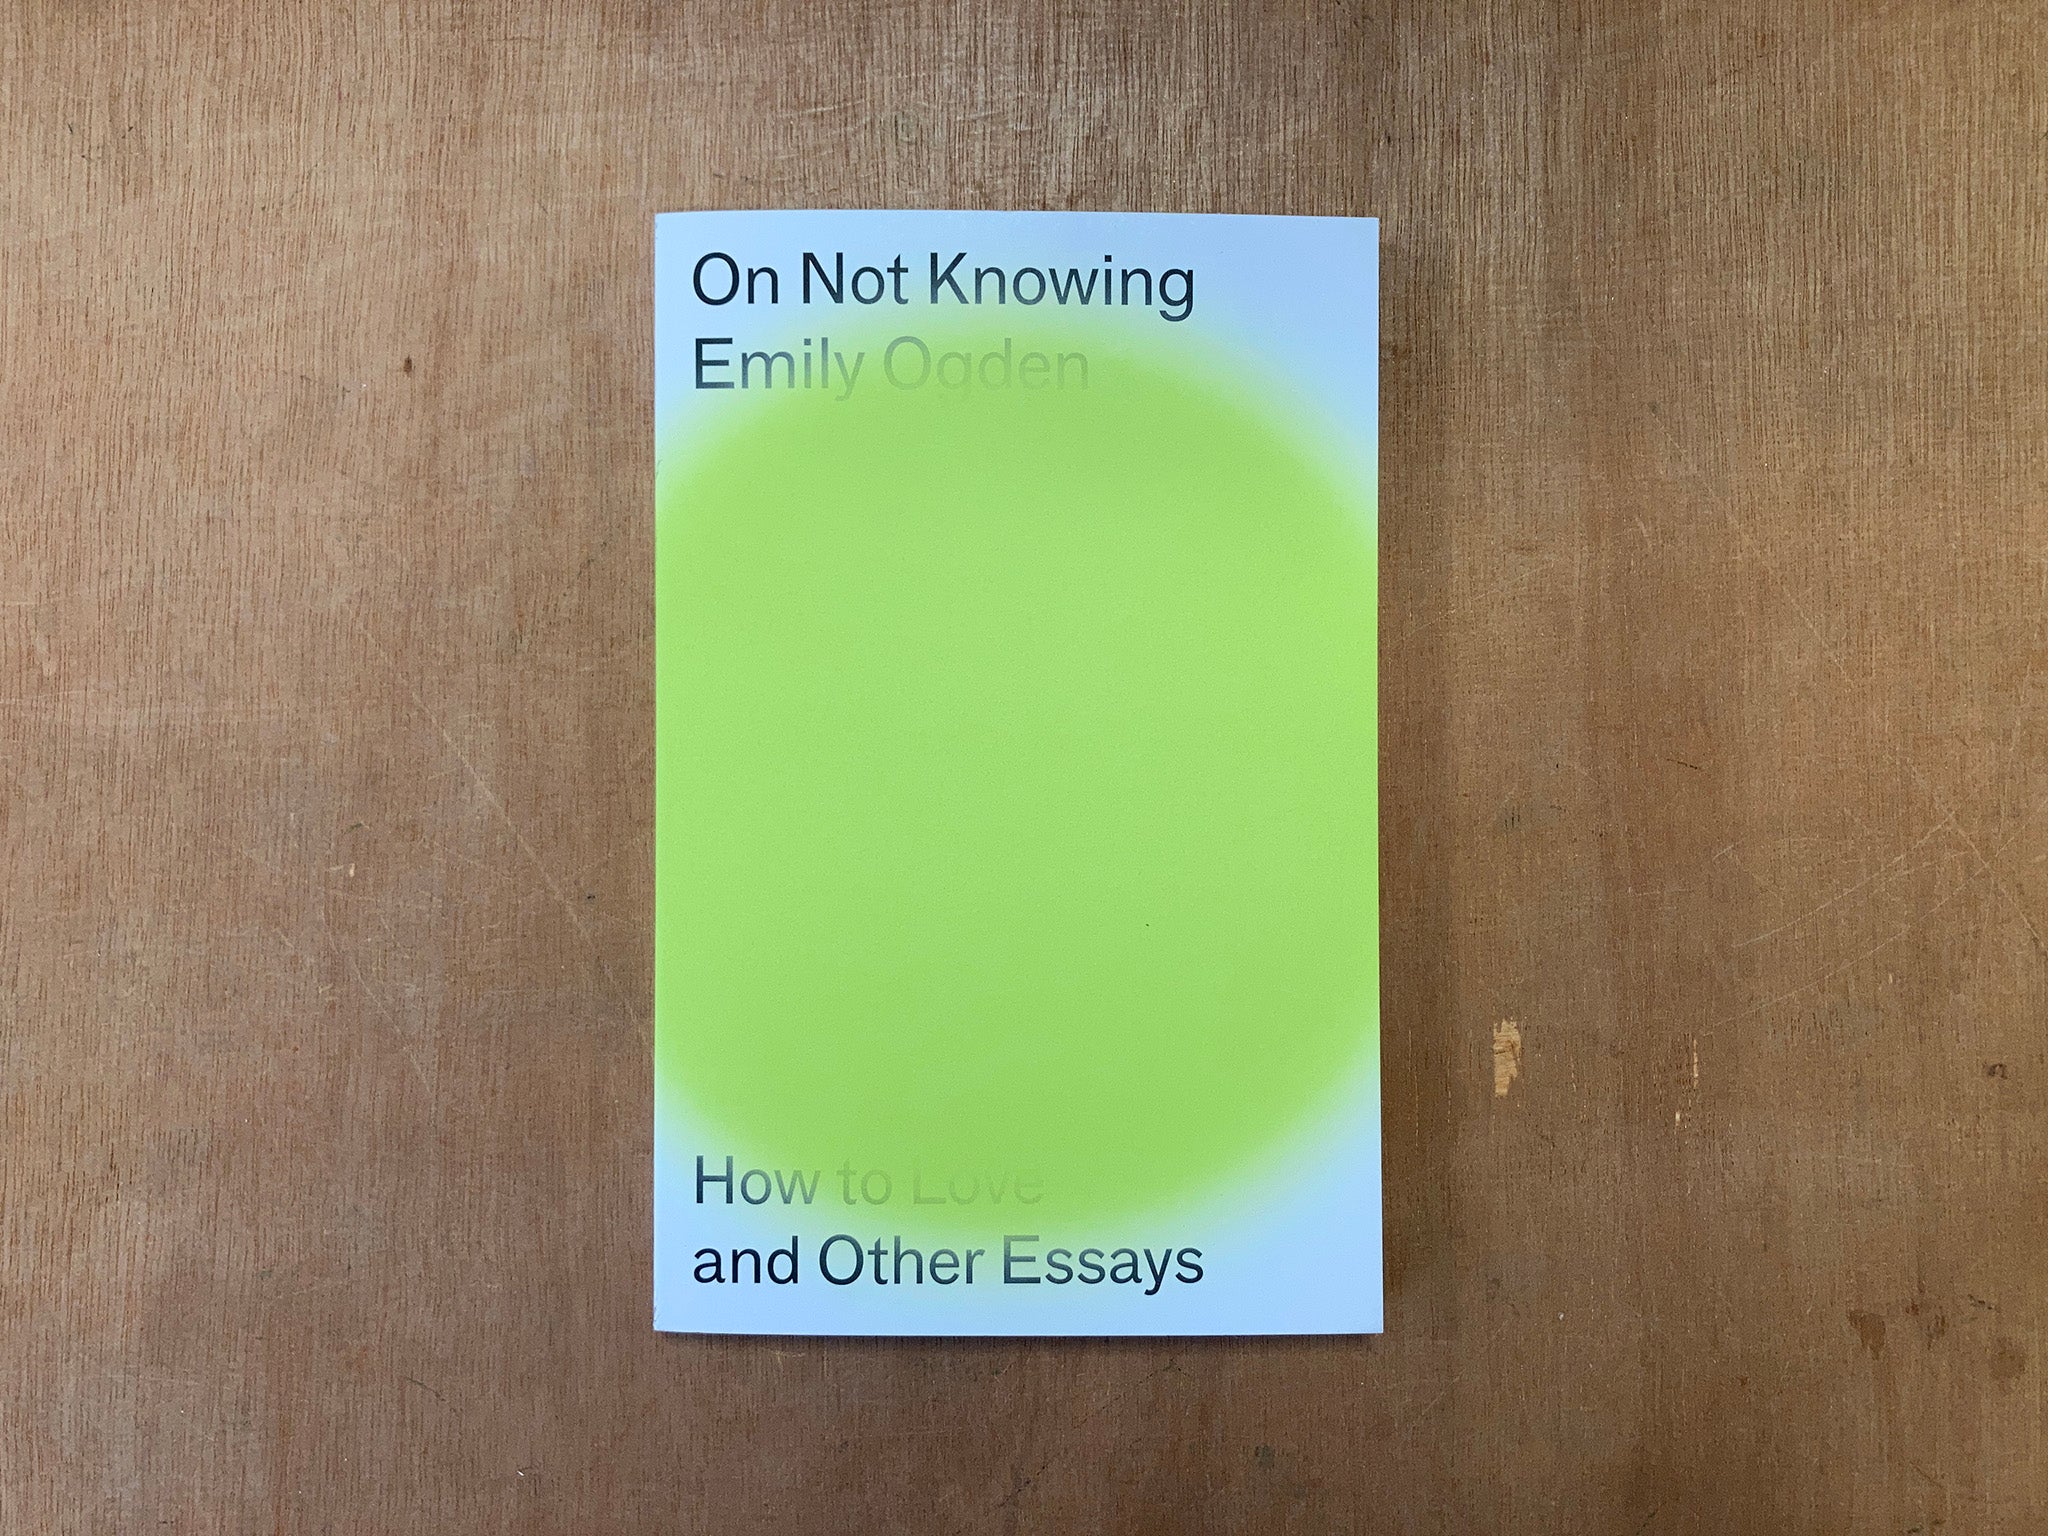 ON NOT KNOWING by Emily Ogden